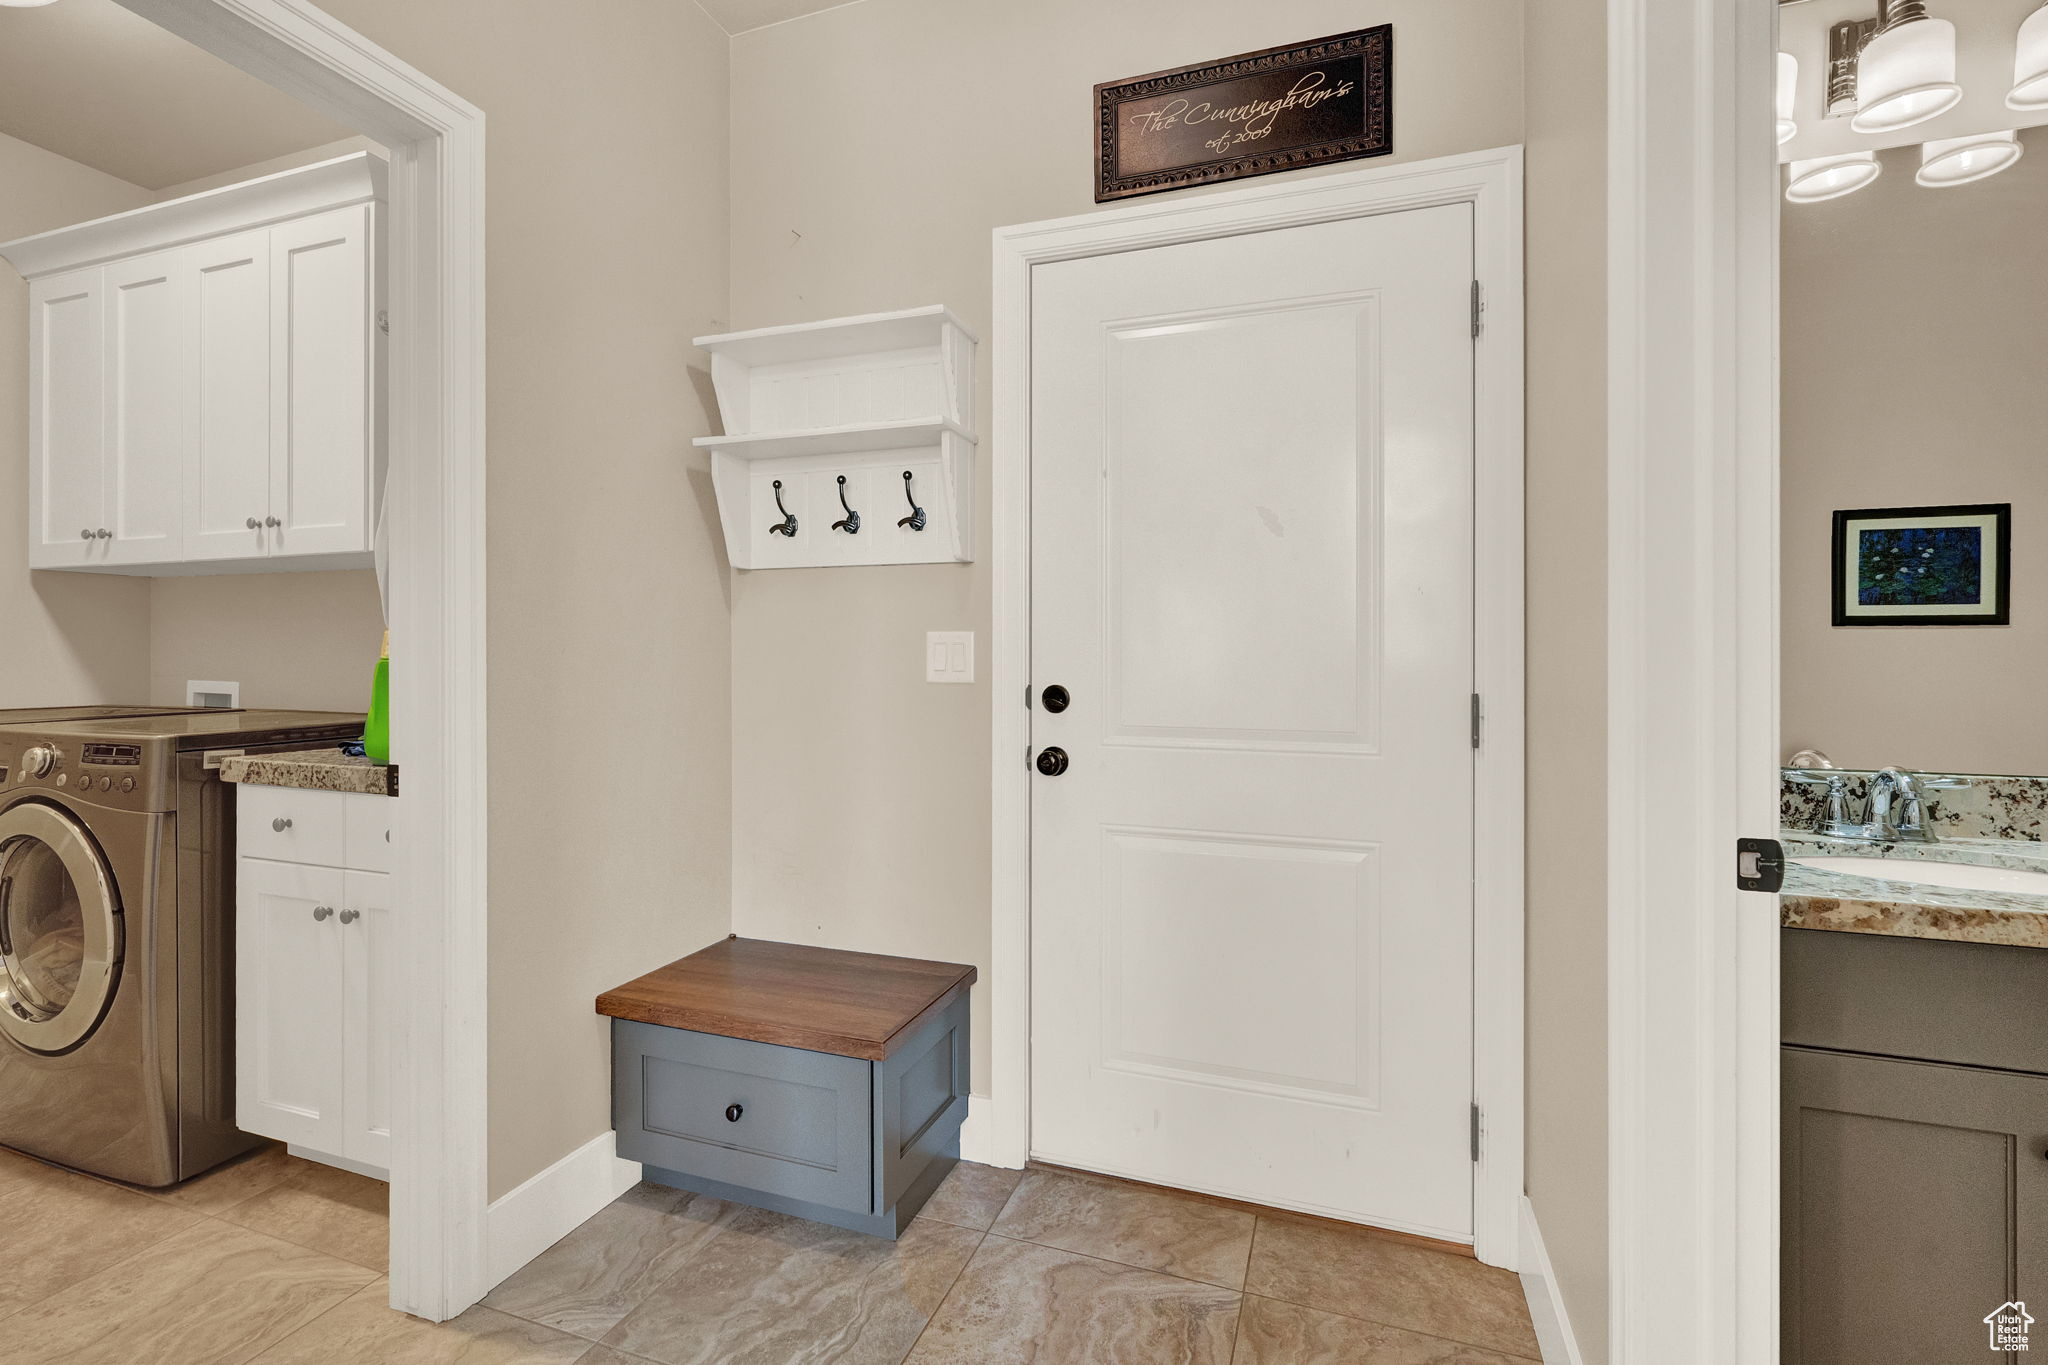 Mudroom featuring light tile floors, washer / clothes dryer, and sink